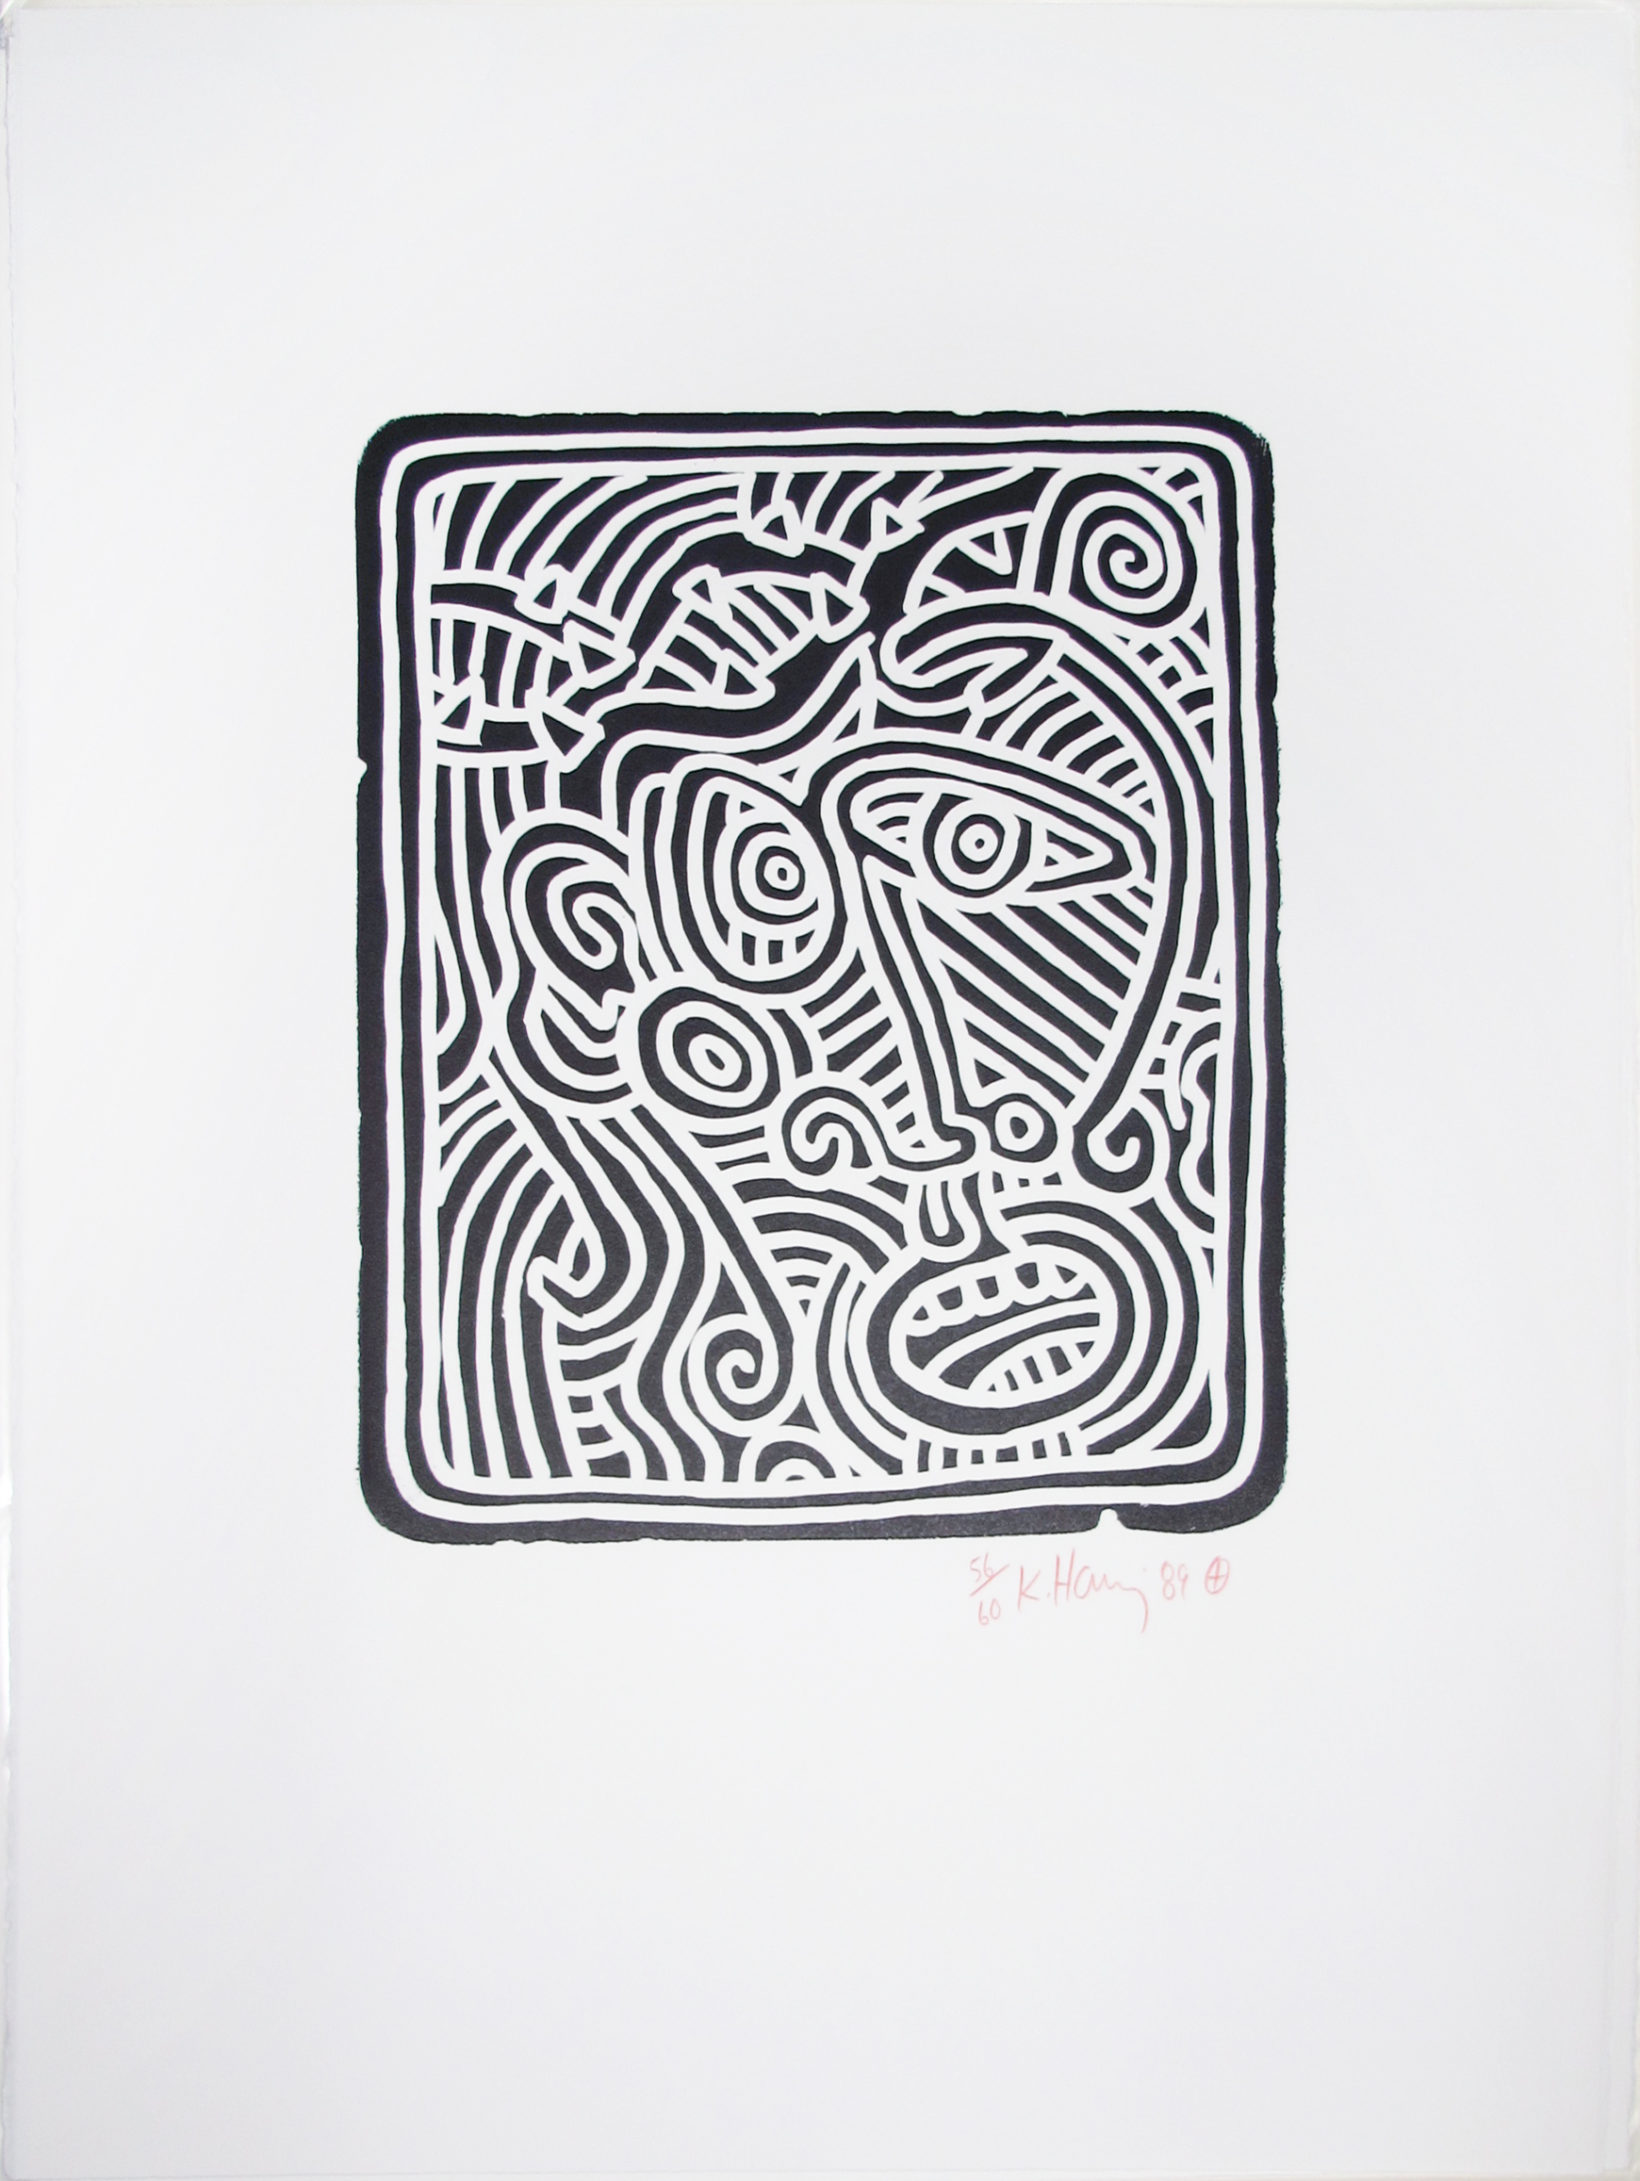 Keith Haring | Stones 2 | 1989 | Image of Artists' work.